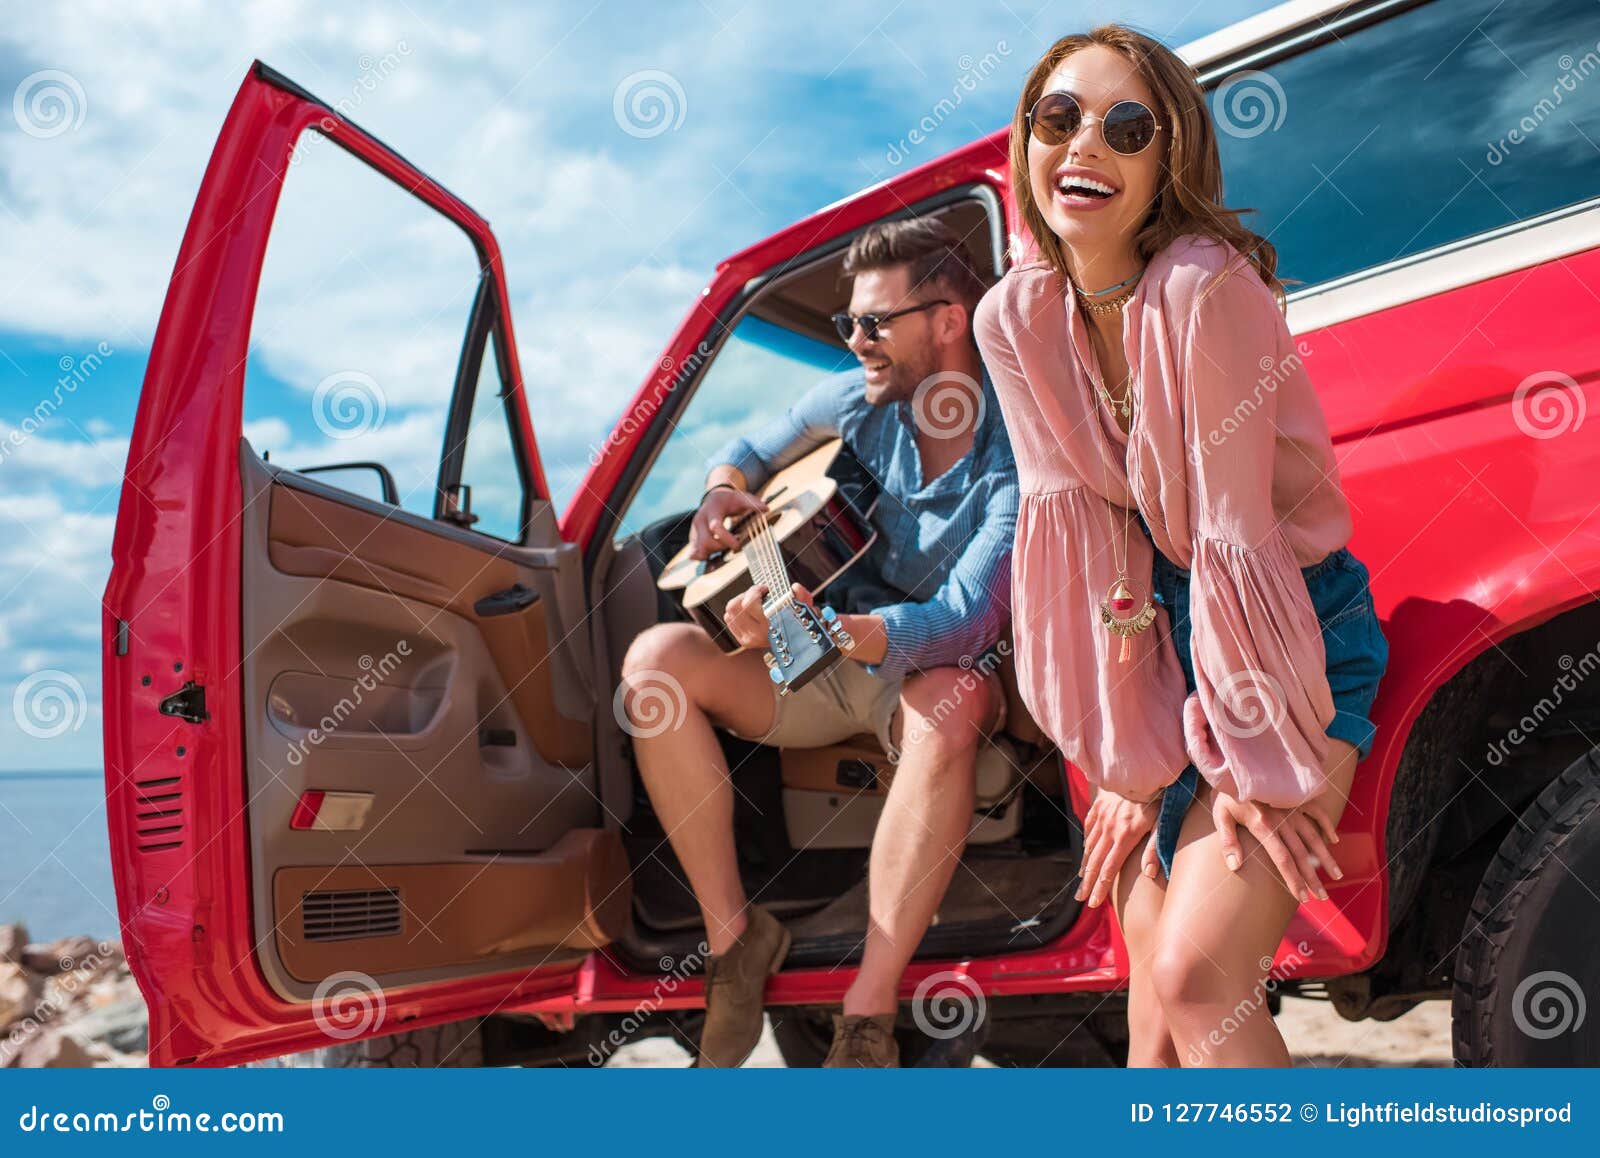 young man playing guitar near car with cheerful girlfriend